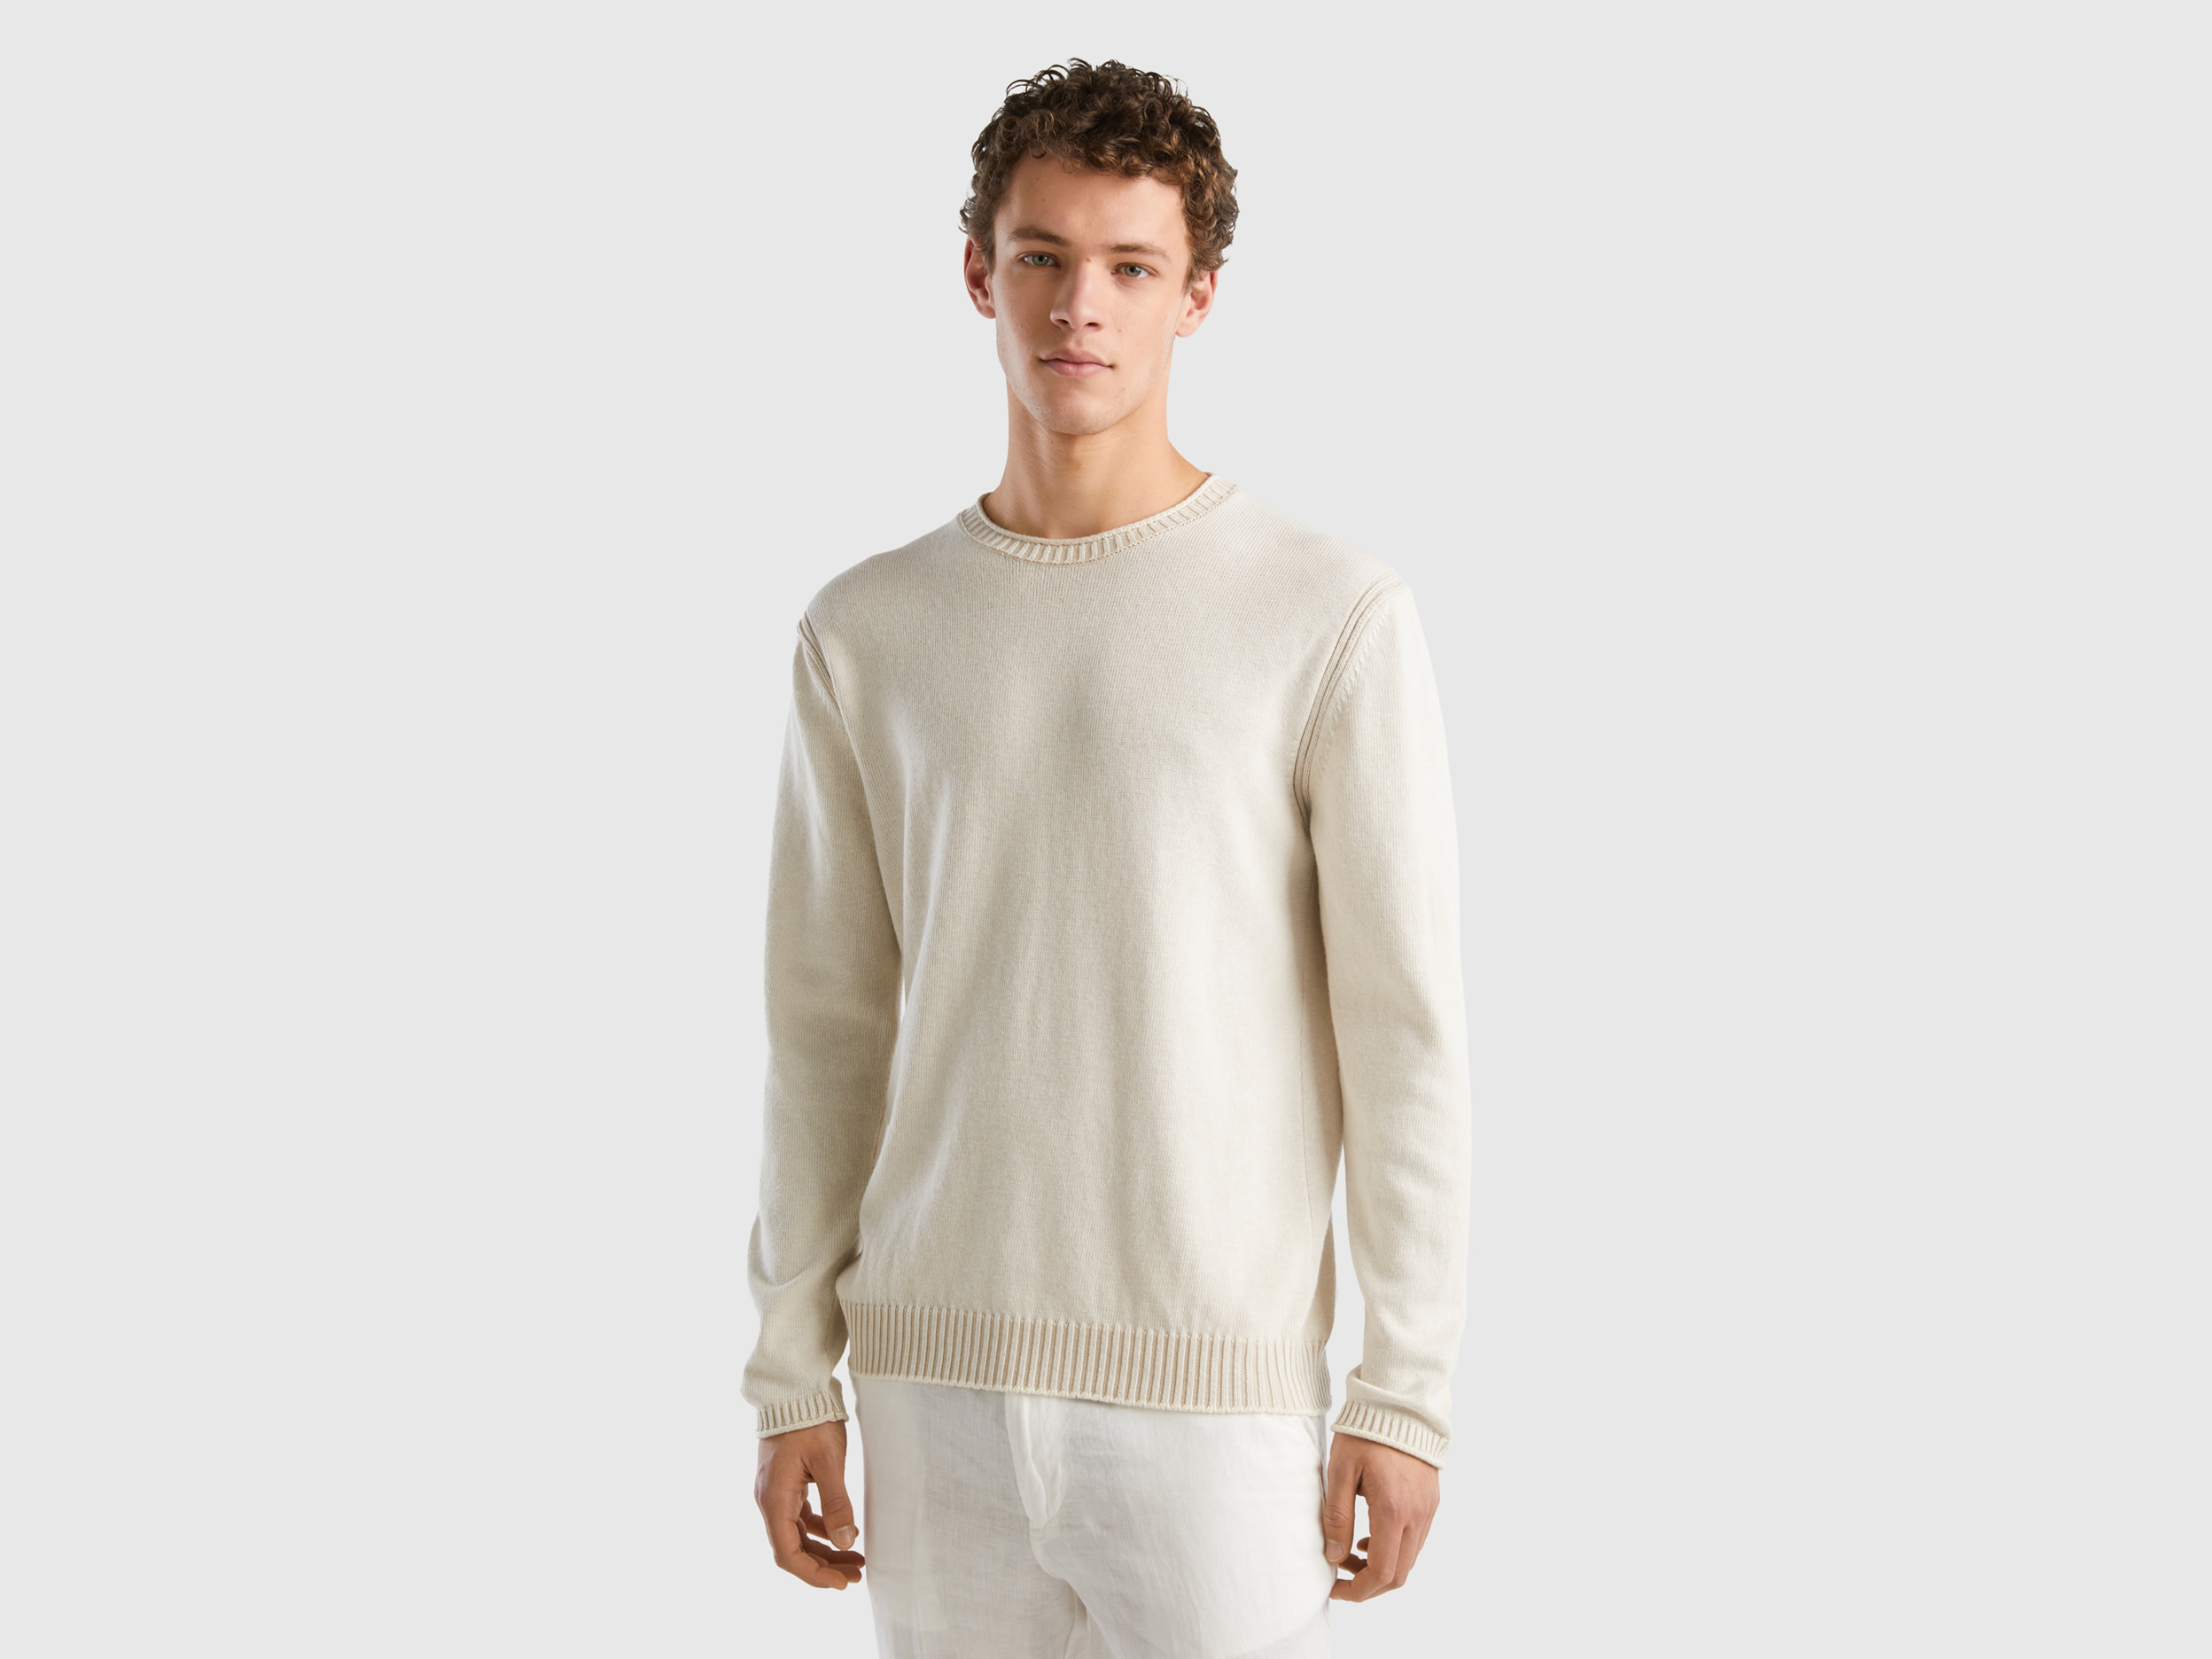 Image of Benetton, Sweater In Recycled Cotton Blend, size M, Creamy White, Men